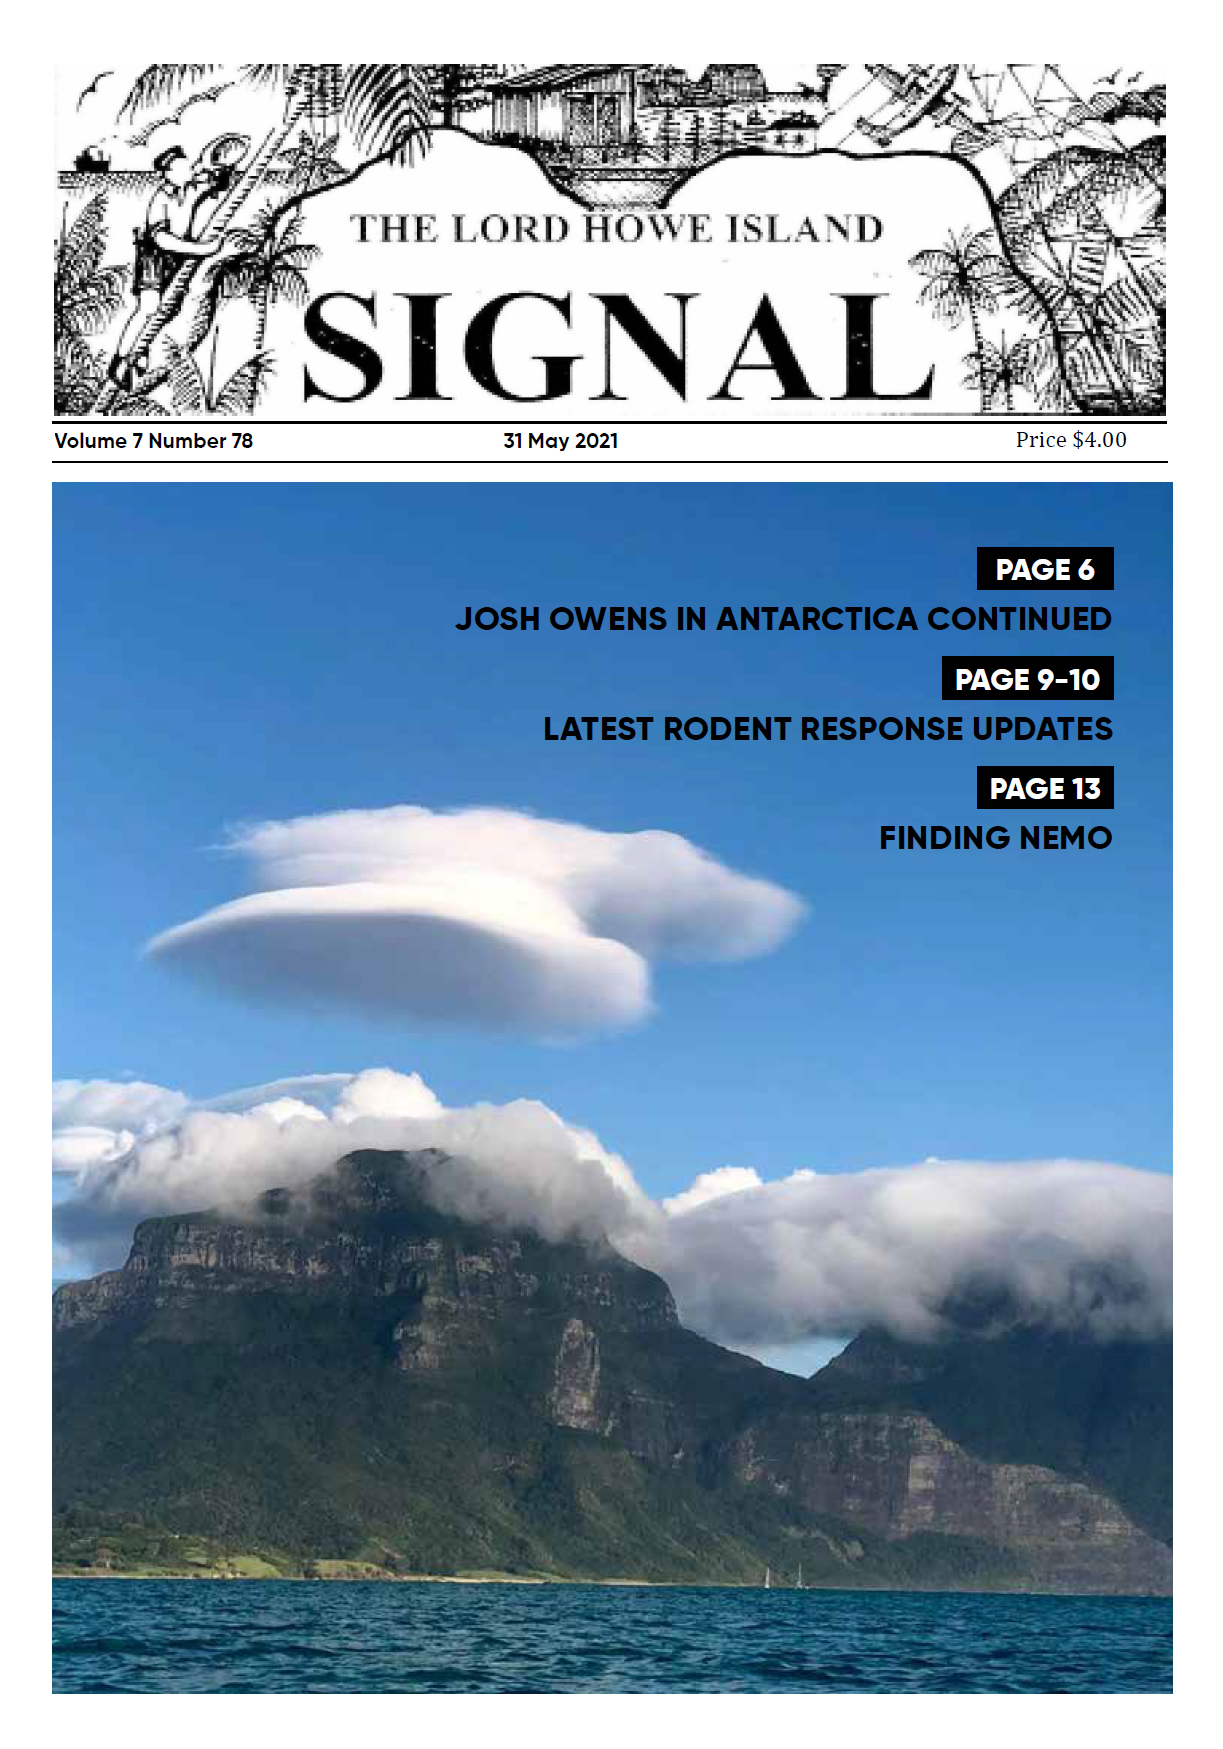 The Lord Howe Island Signal 31 May 2021